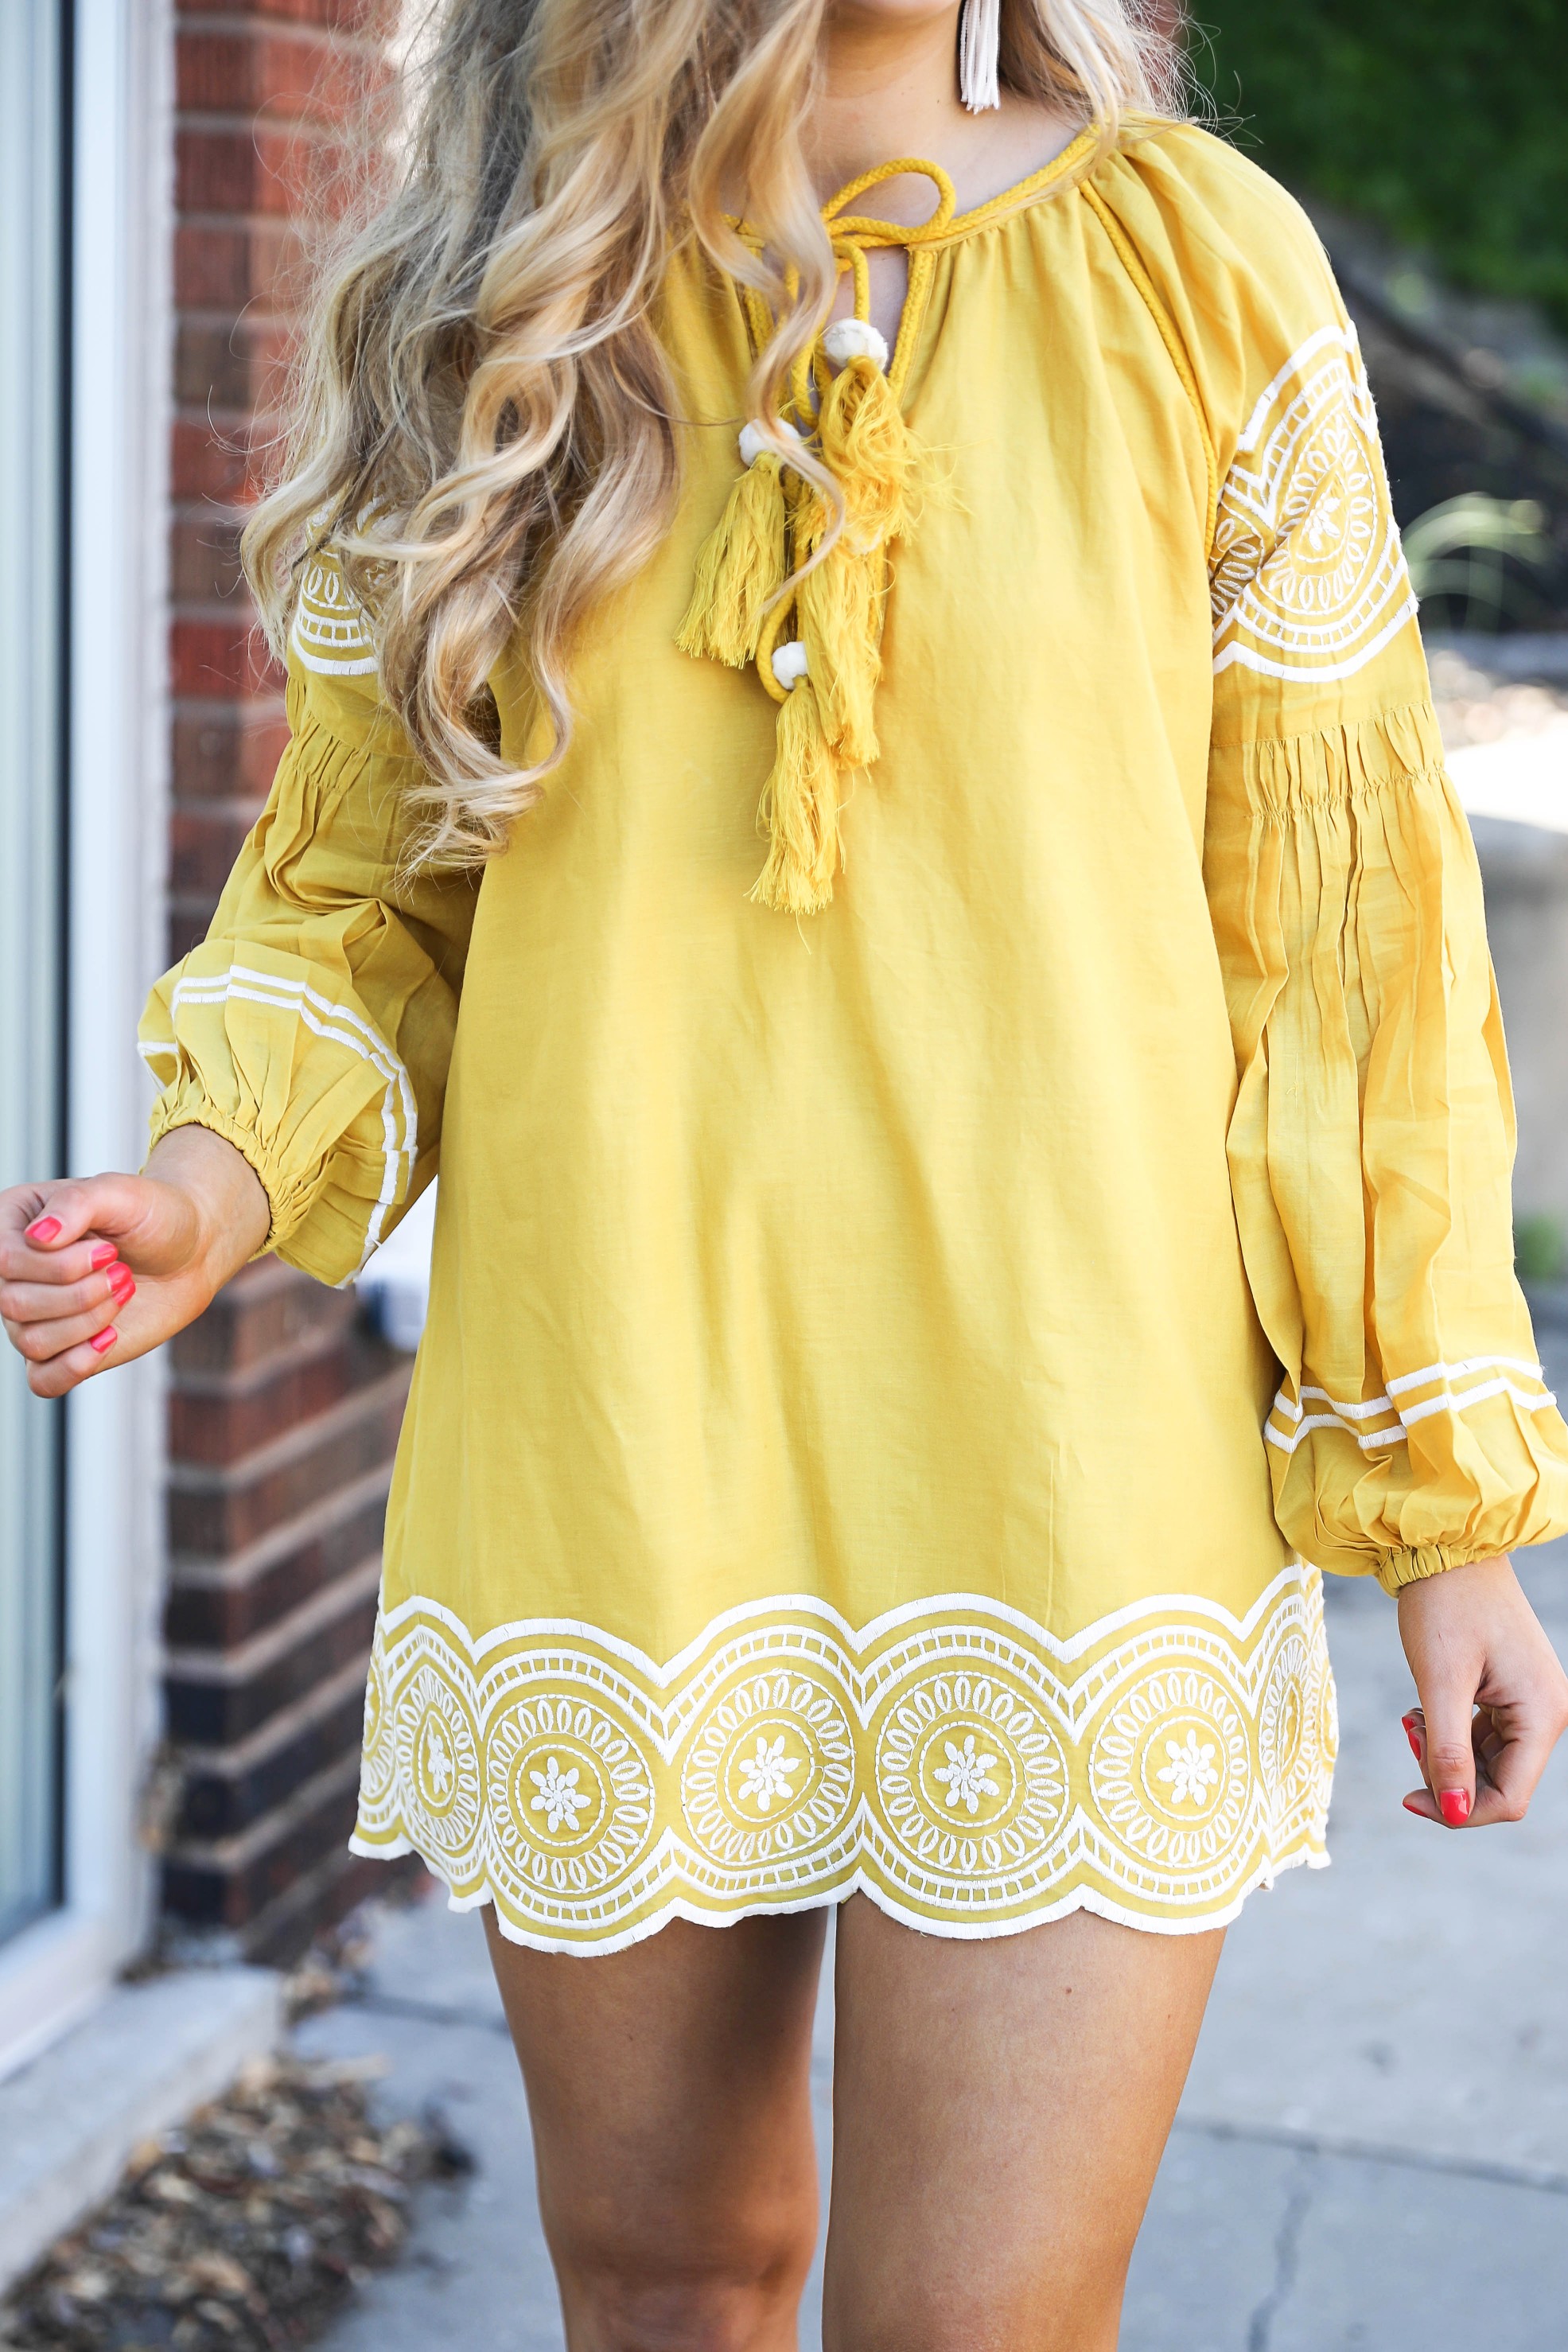 Fun yellow and white embroidered dress on fashion blog daily dose of charm by lauren lindmark dailydoseofcharm.com